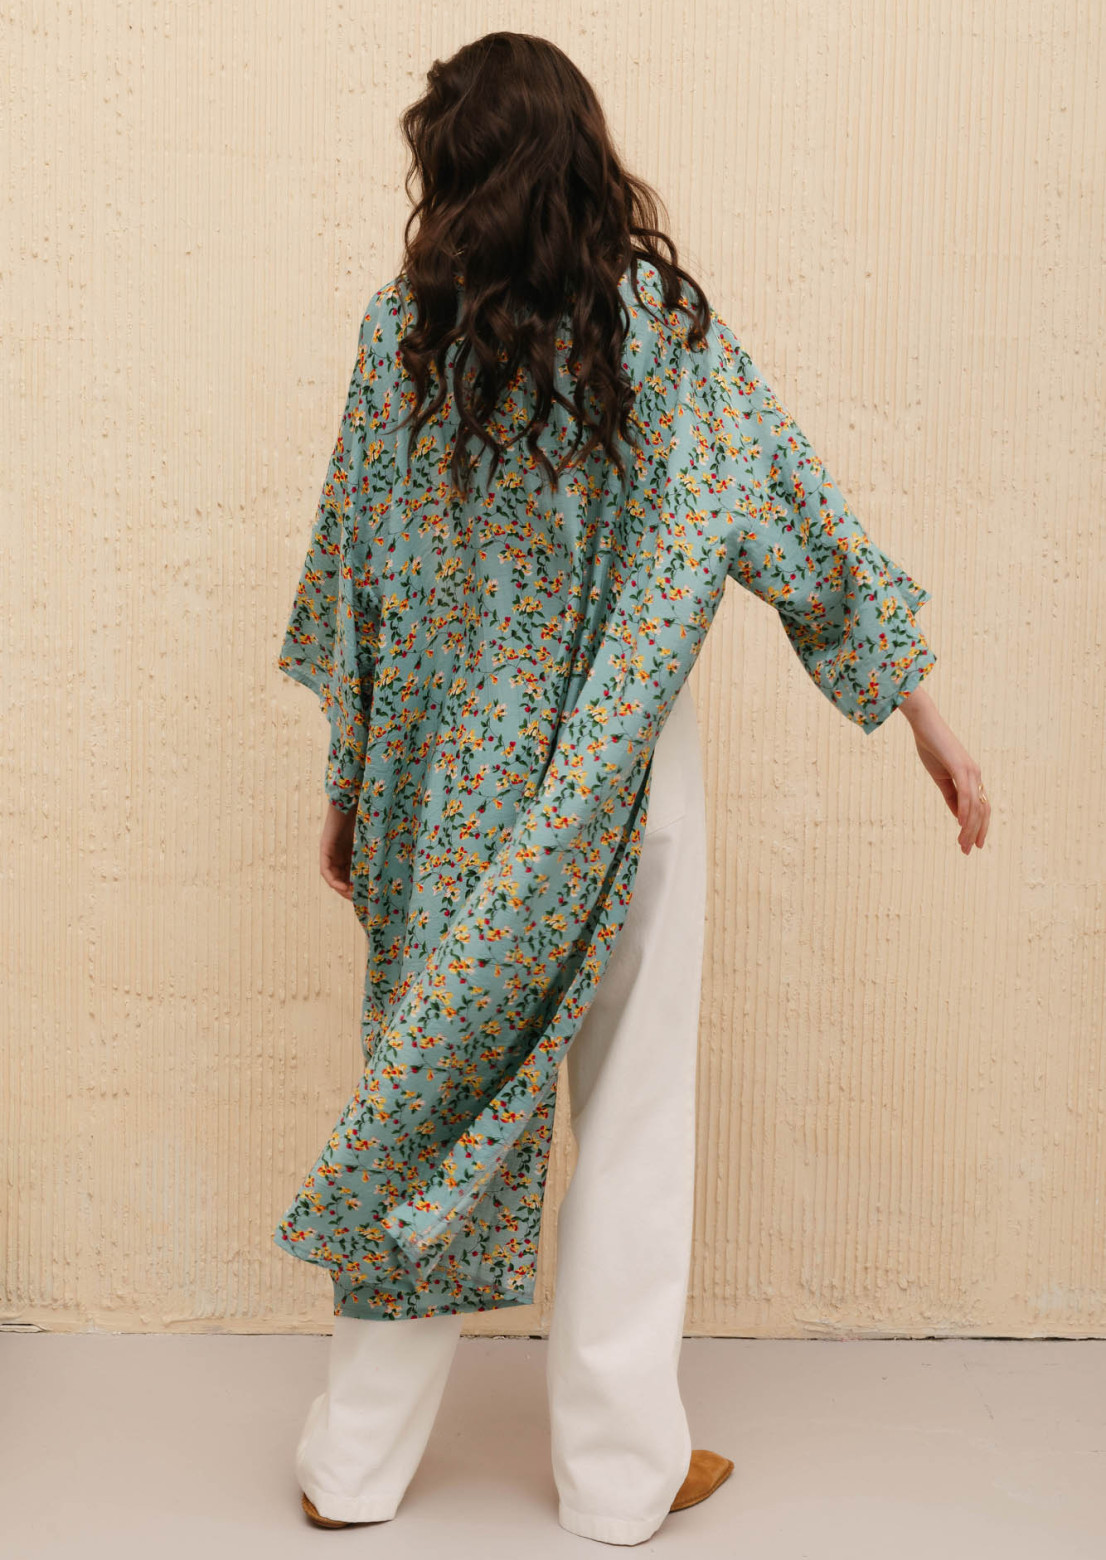 Grey-blue color kimono with a flower